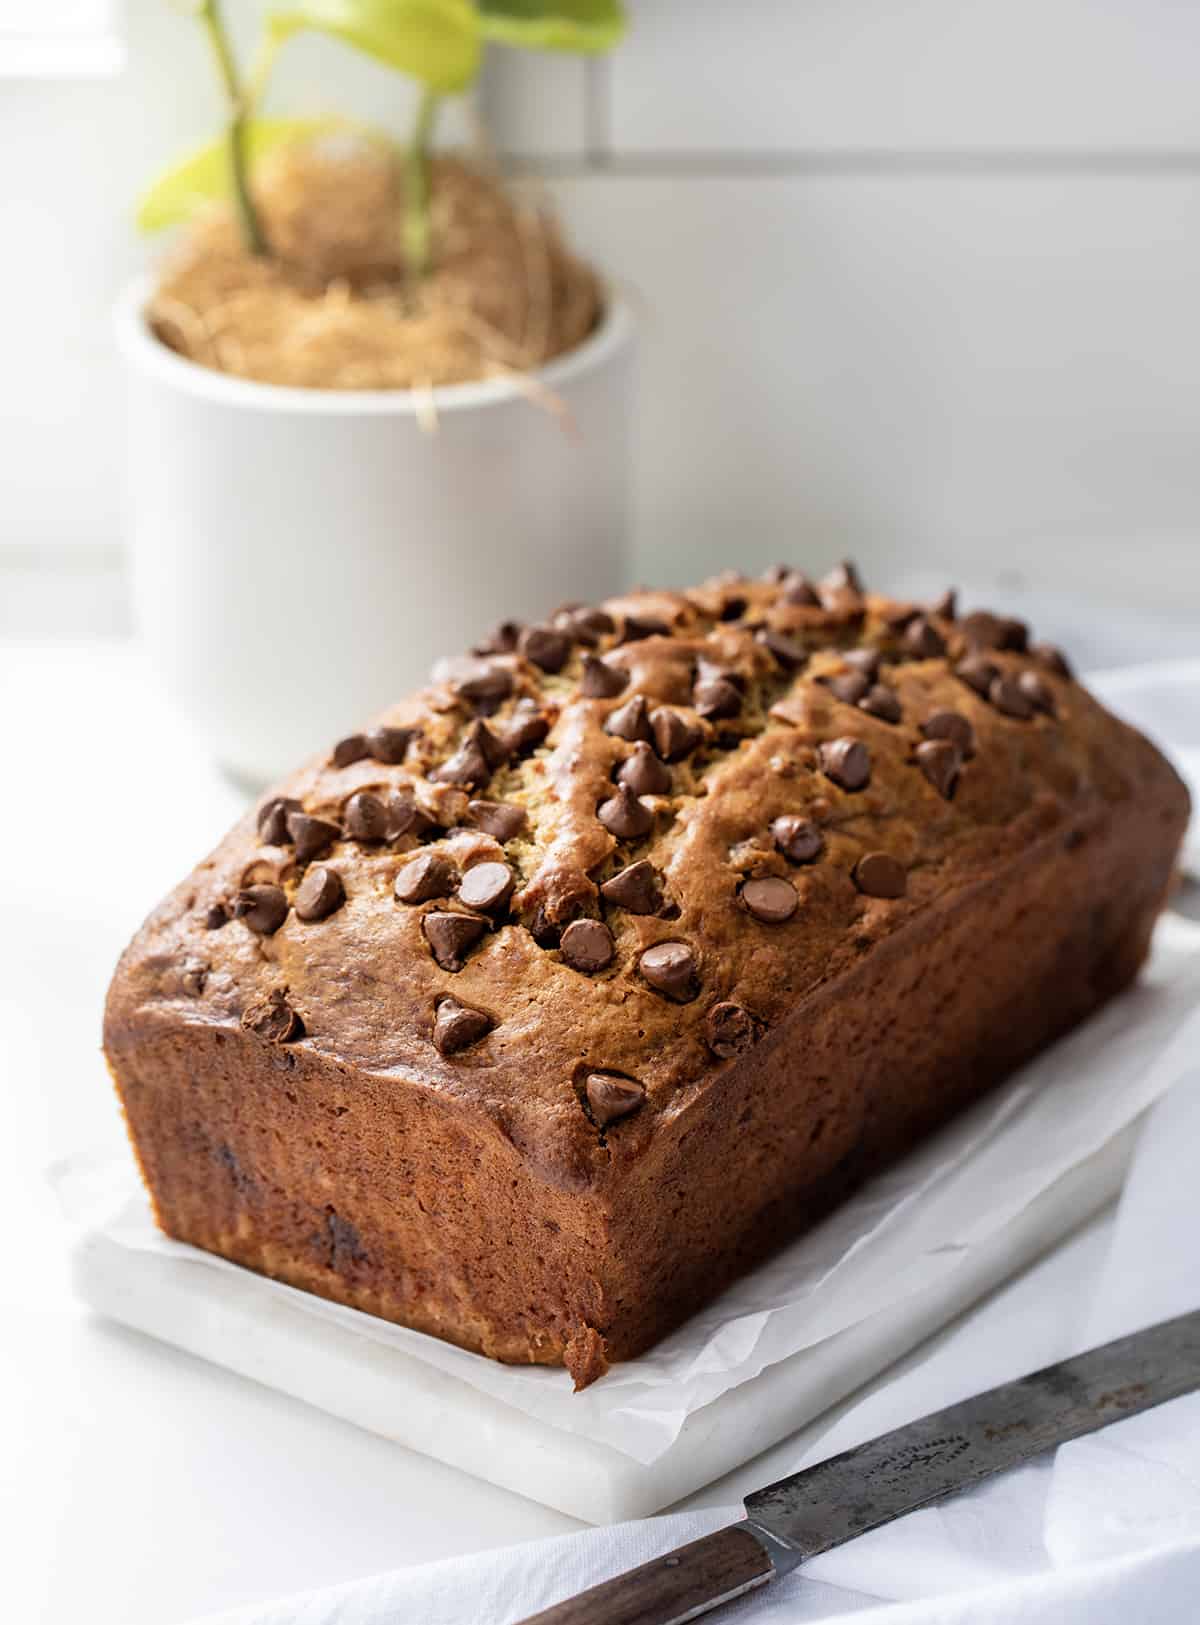 Loaf of Chocolate Chip Banana Bread on a Counter in Front of a Window with a Plant.